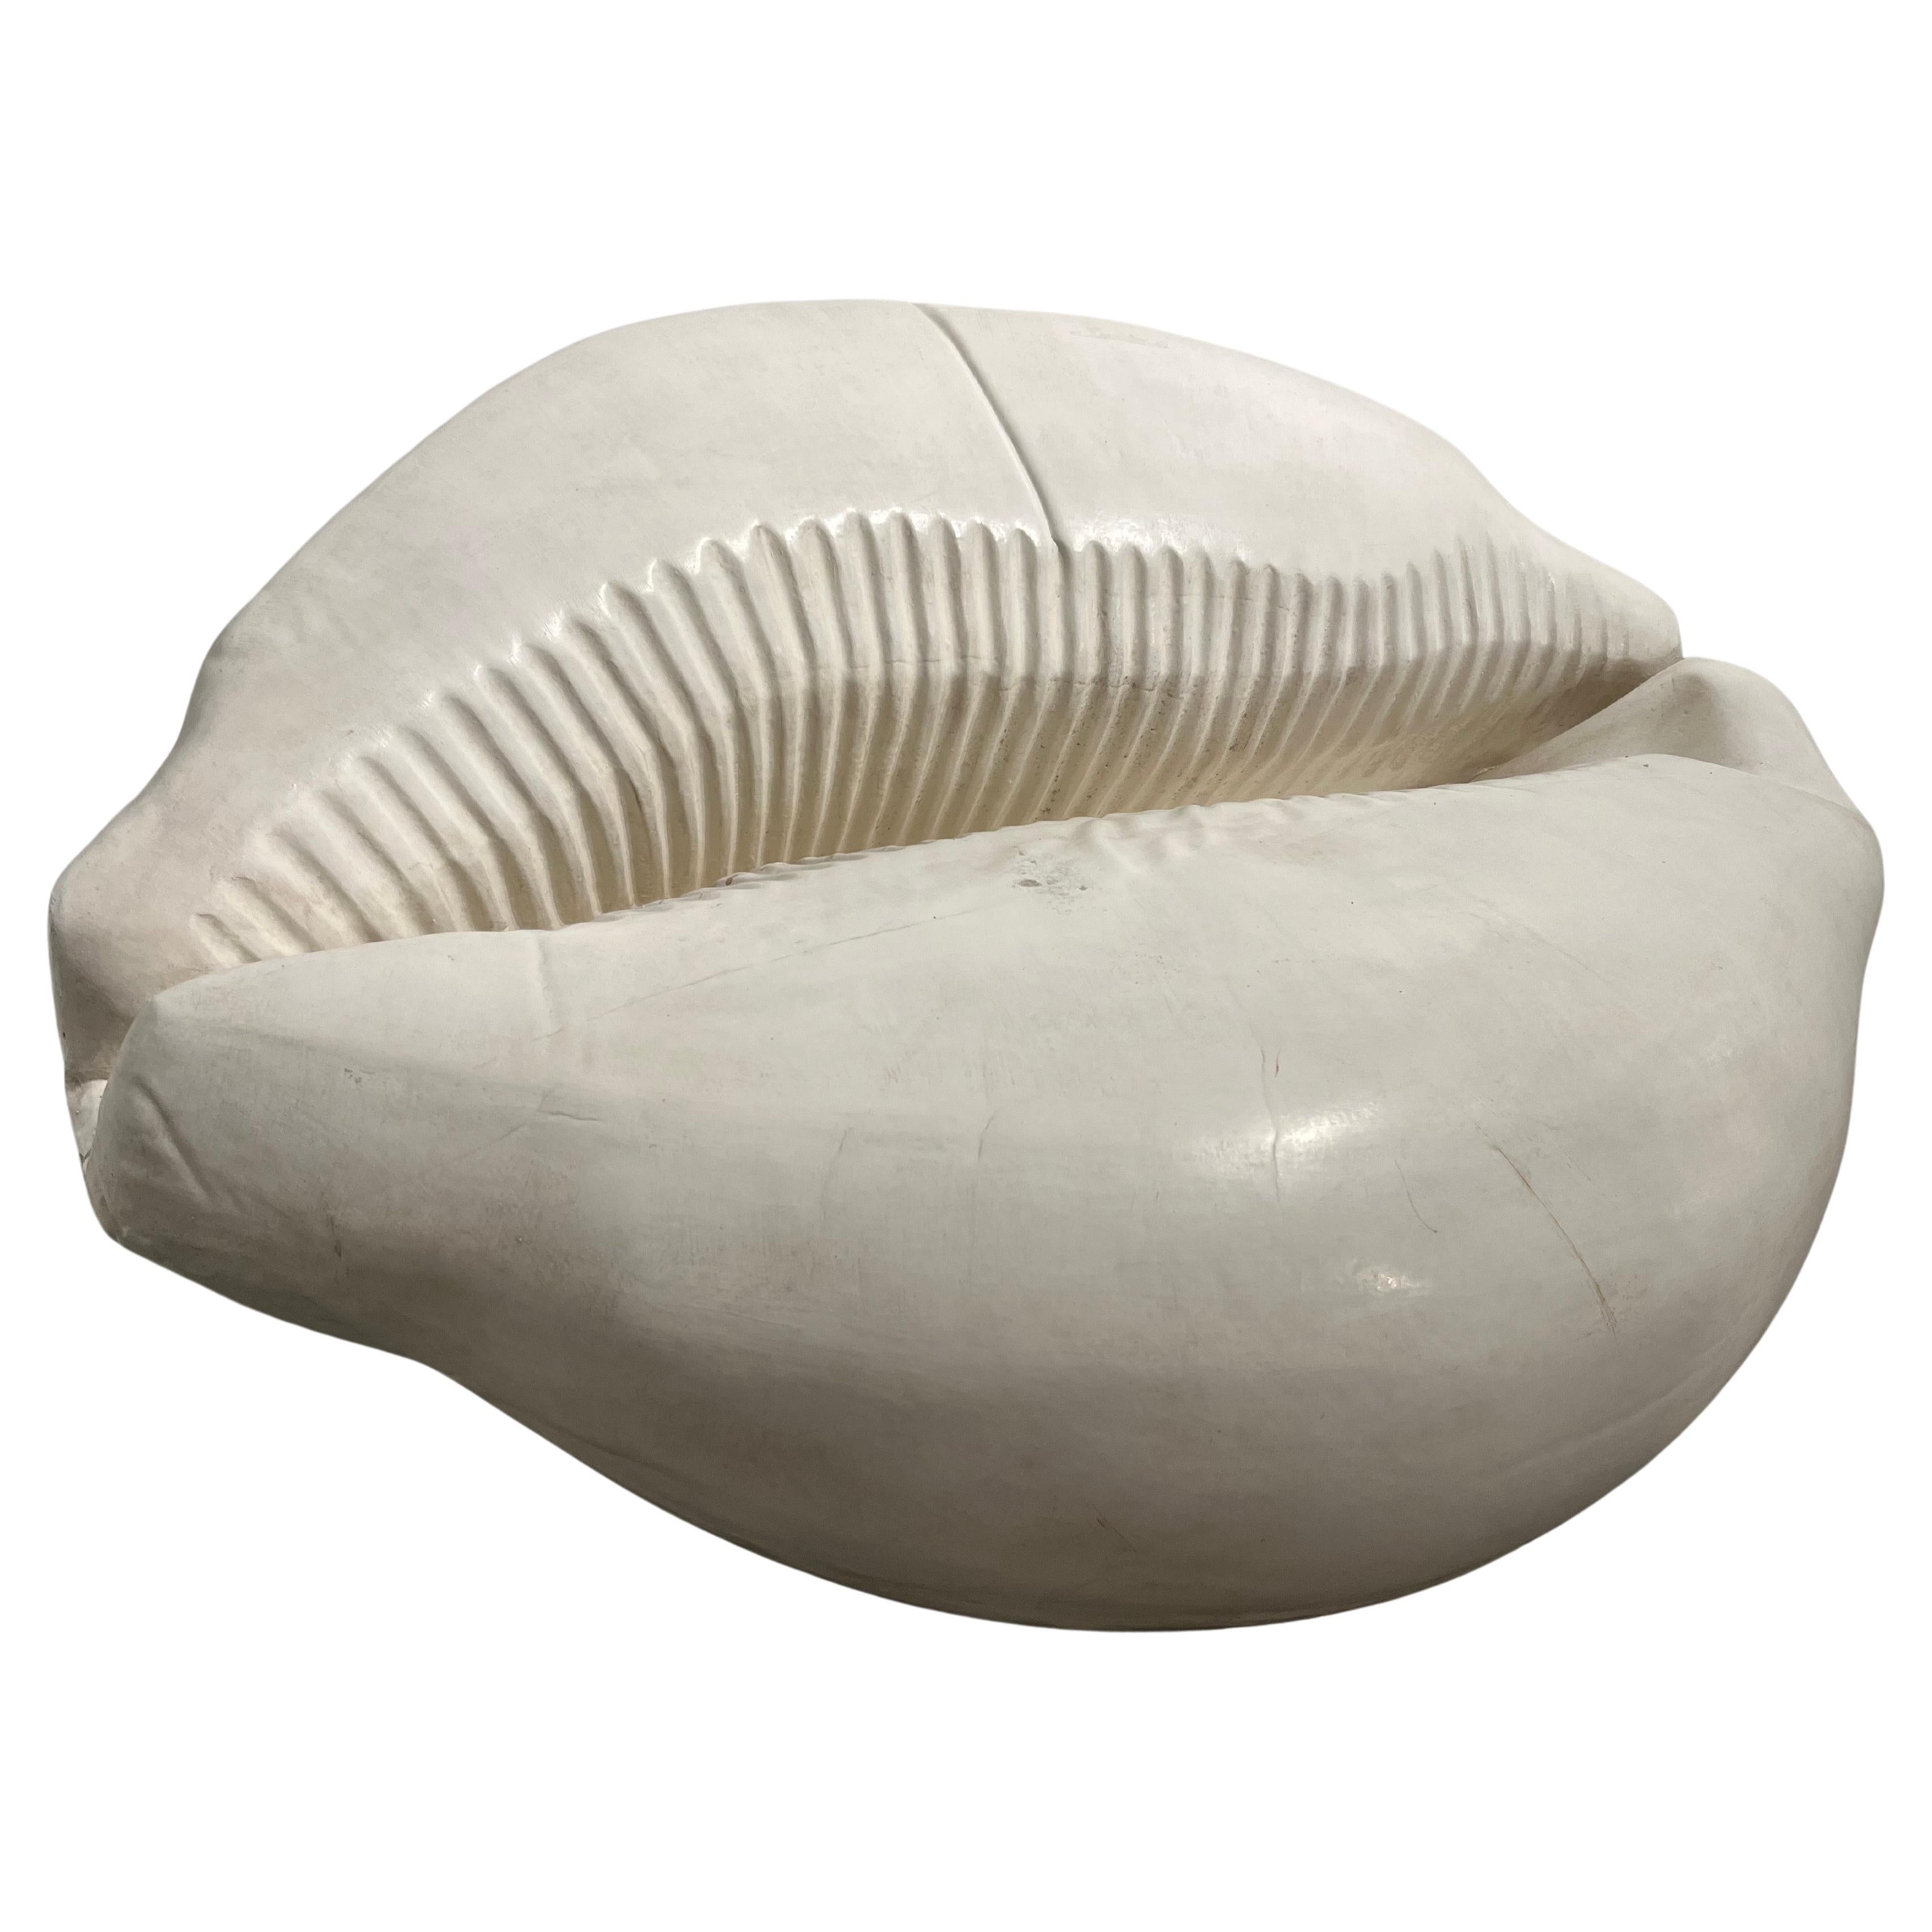 Louis Durot French Post War Artist Cowrie Shell Sofa Settee Sculpture in Polymer For Sale